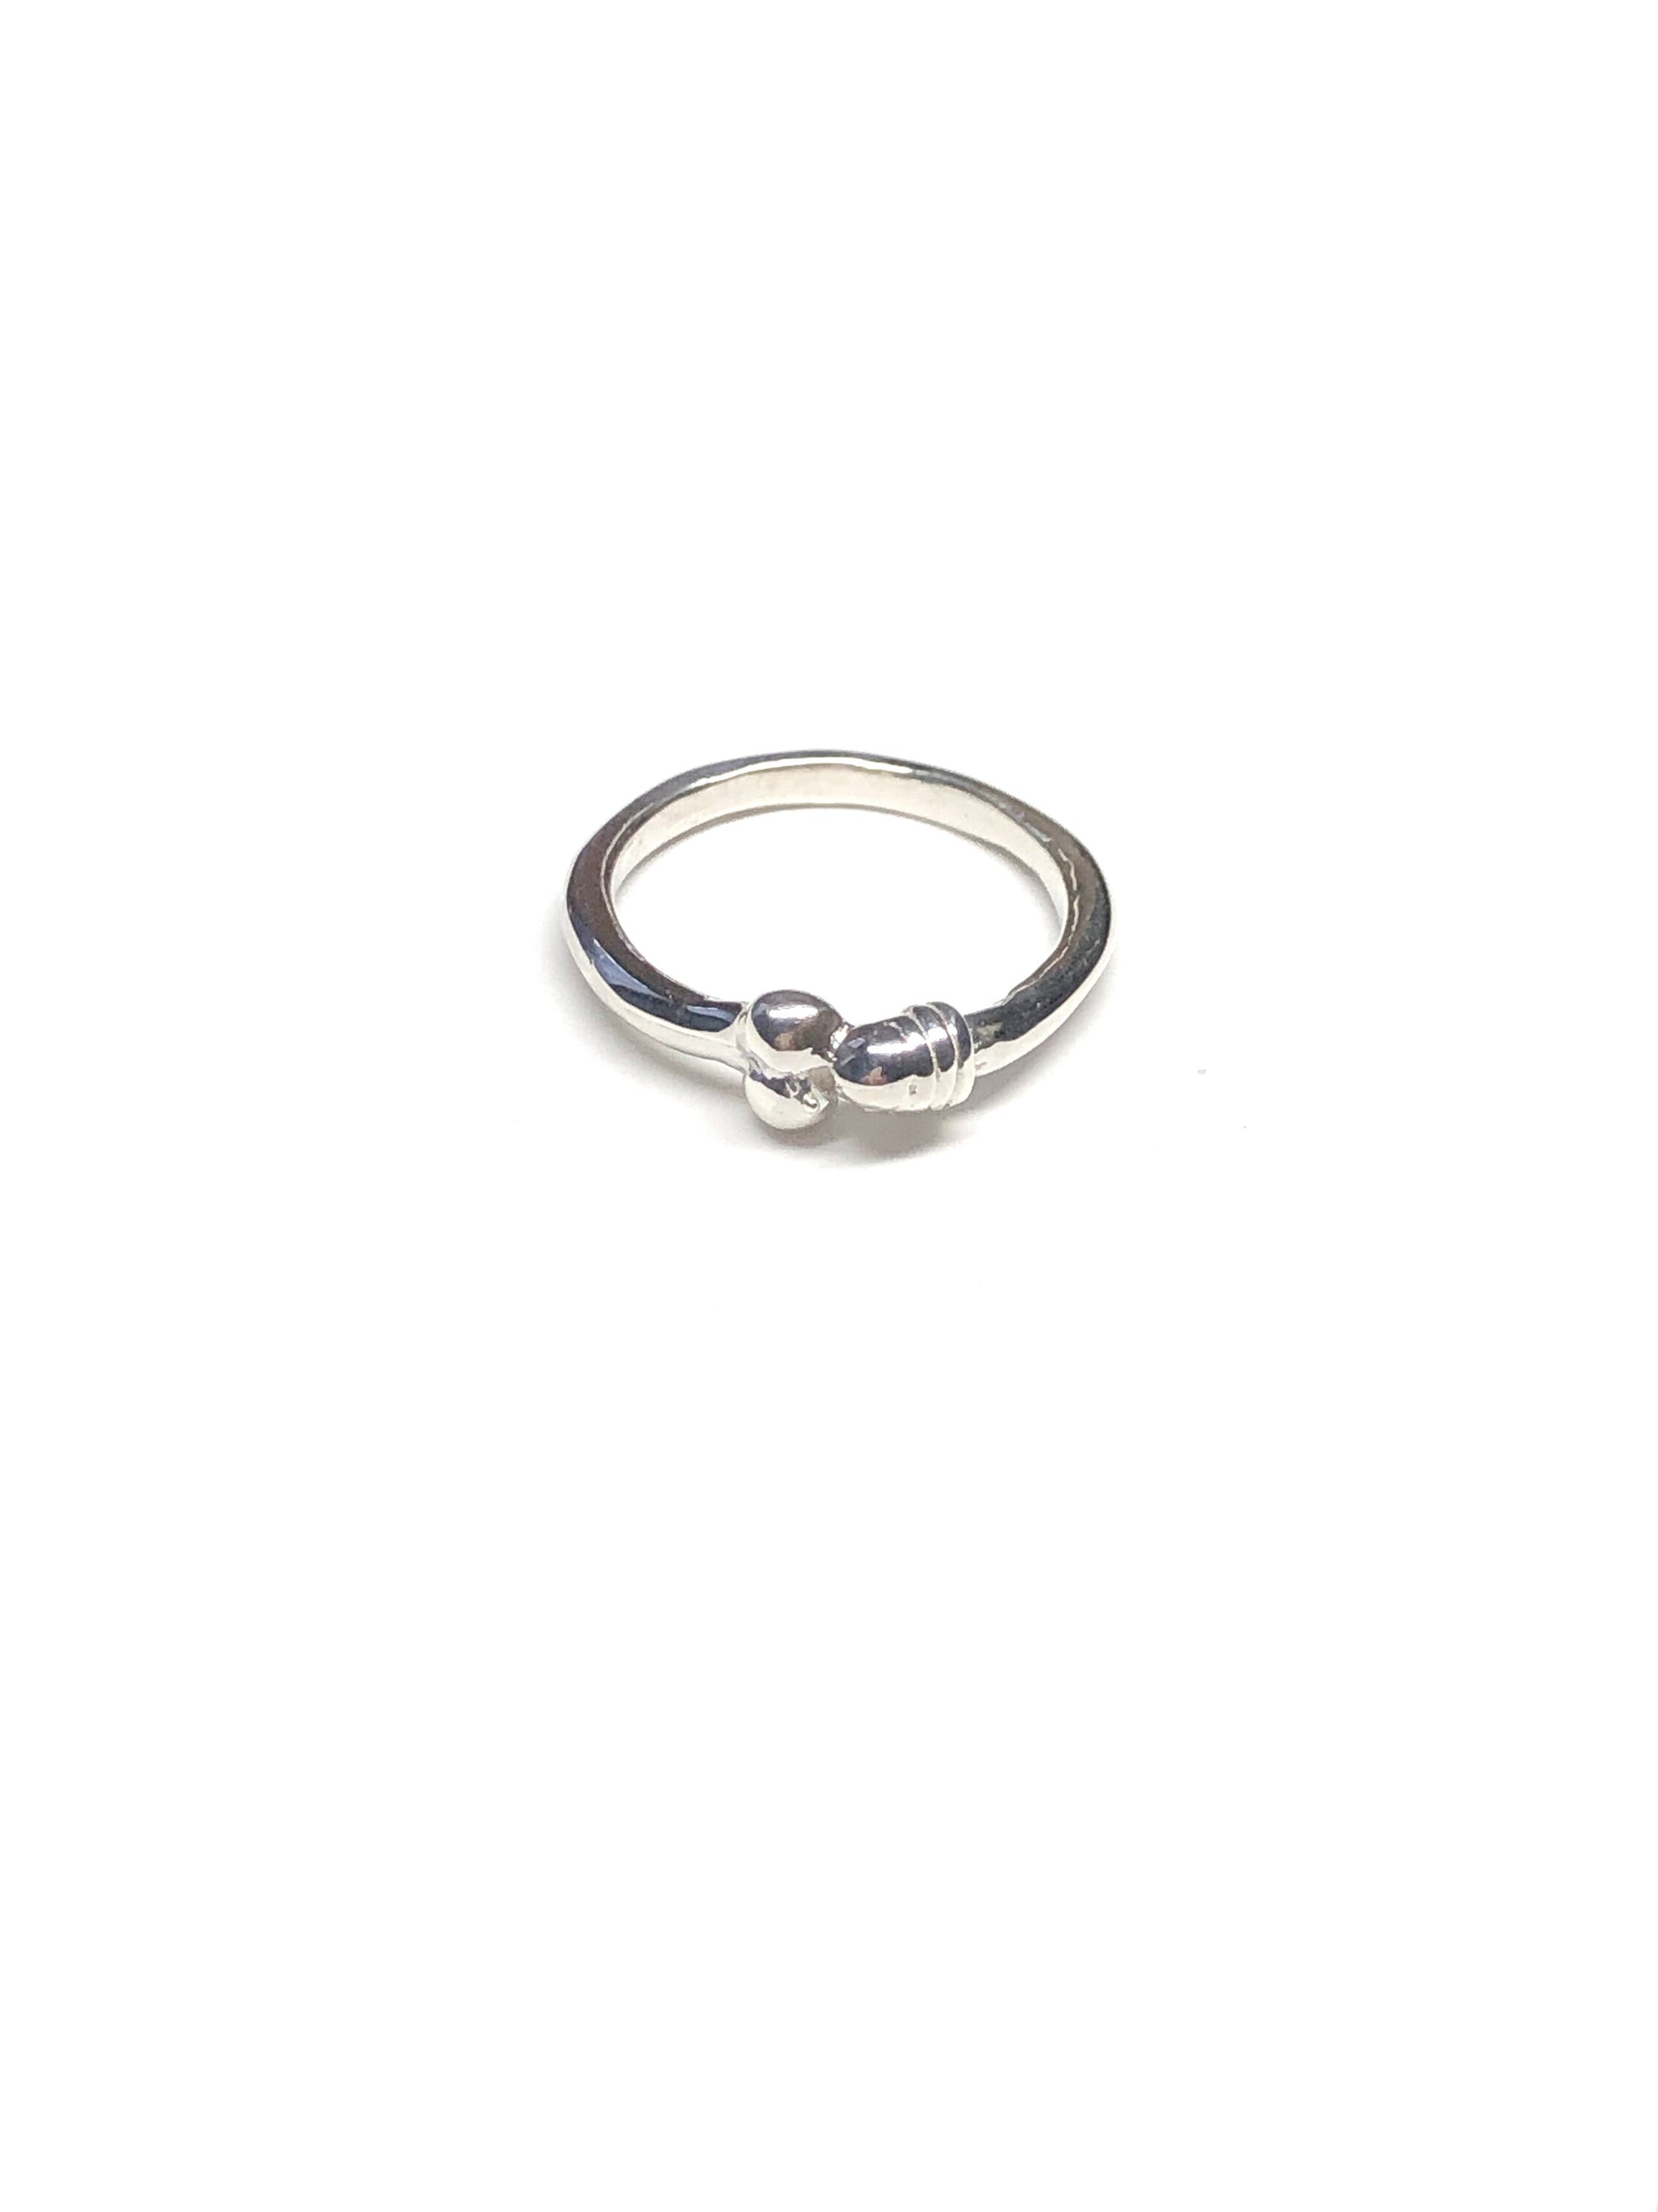 Product photo of Eros Ring by CLARK in high-polished, high-quality Sterling Silver. This discreet design embodies an enigmatic yearning and adoration. Each ring is meticulously handcrafted, using the lost wax casting technique 